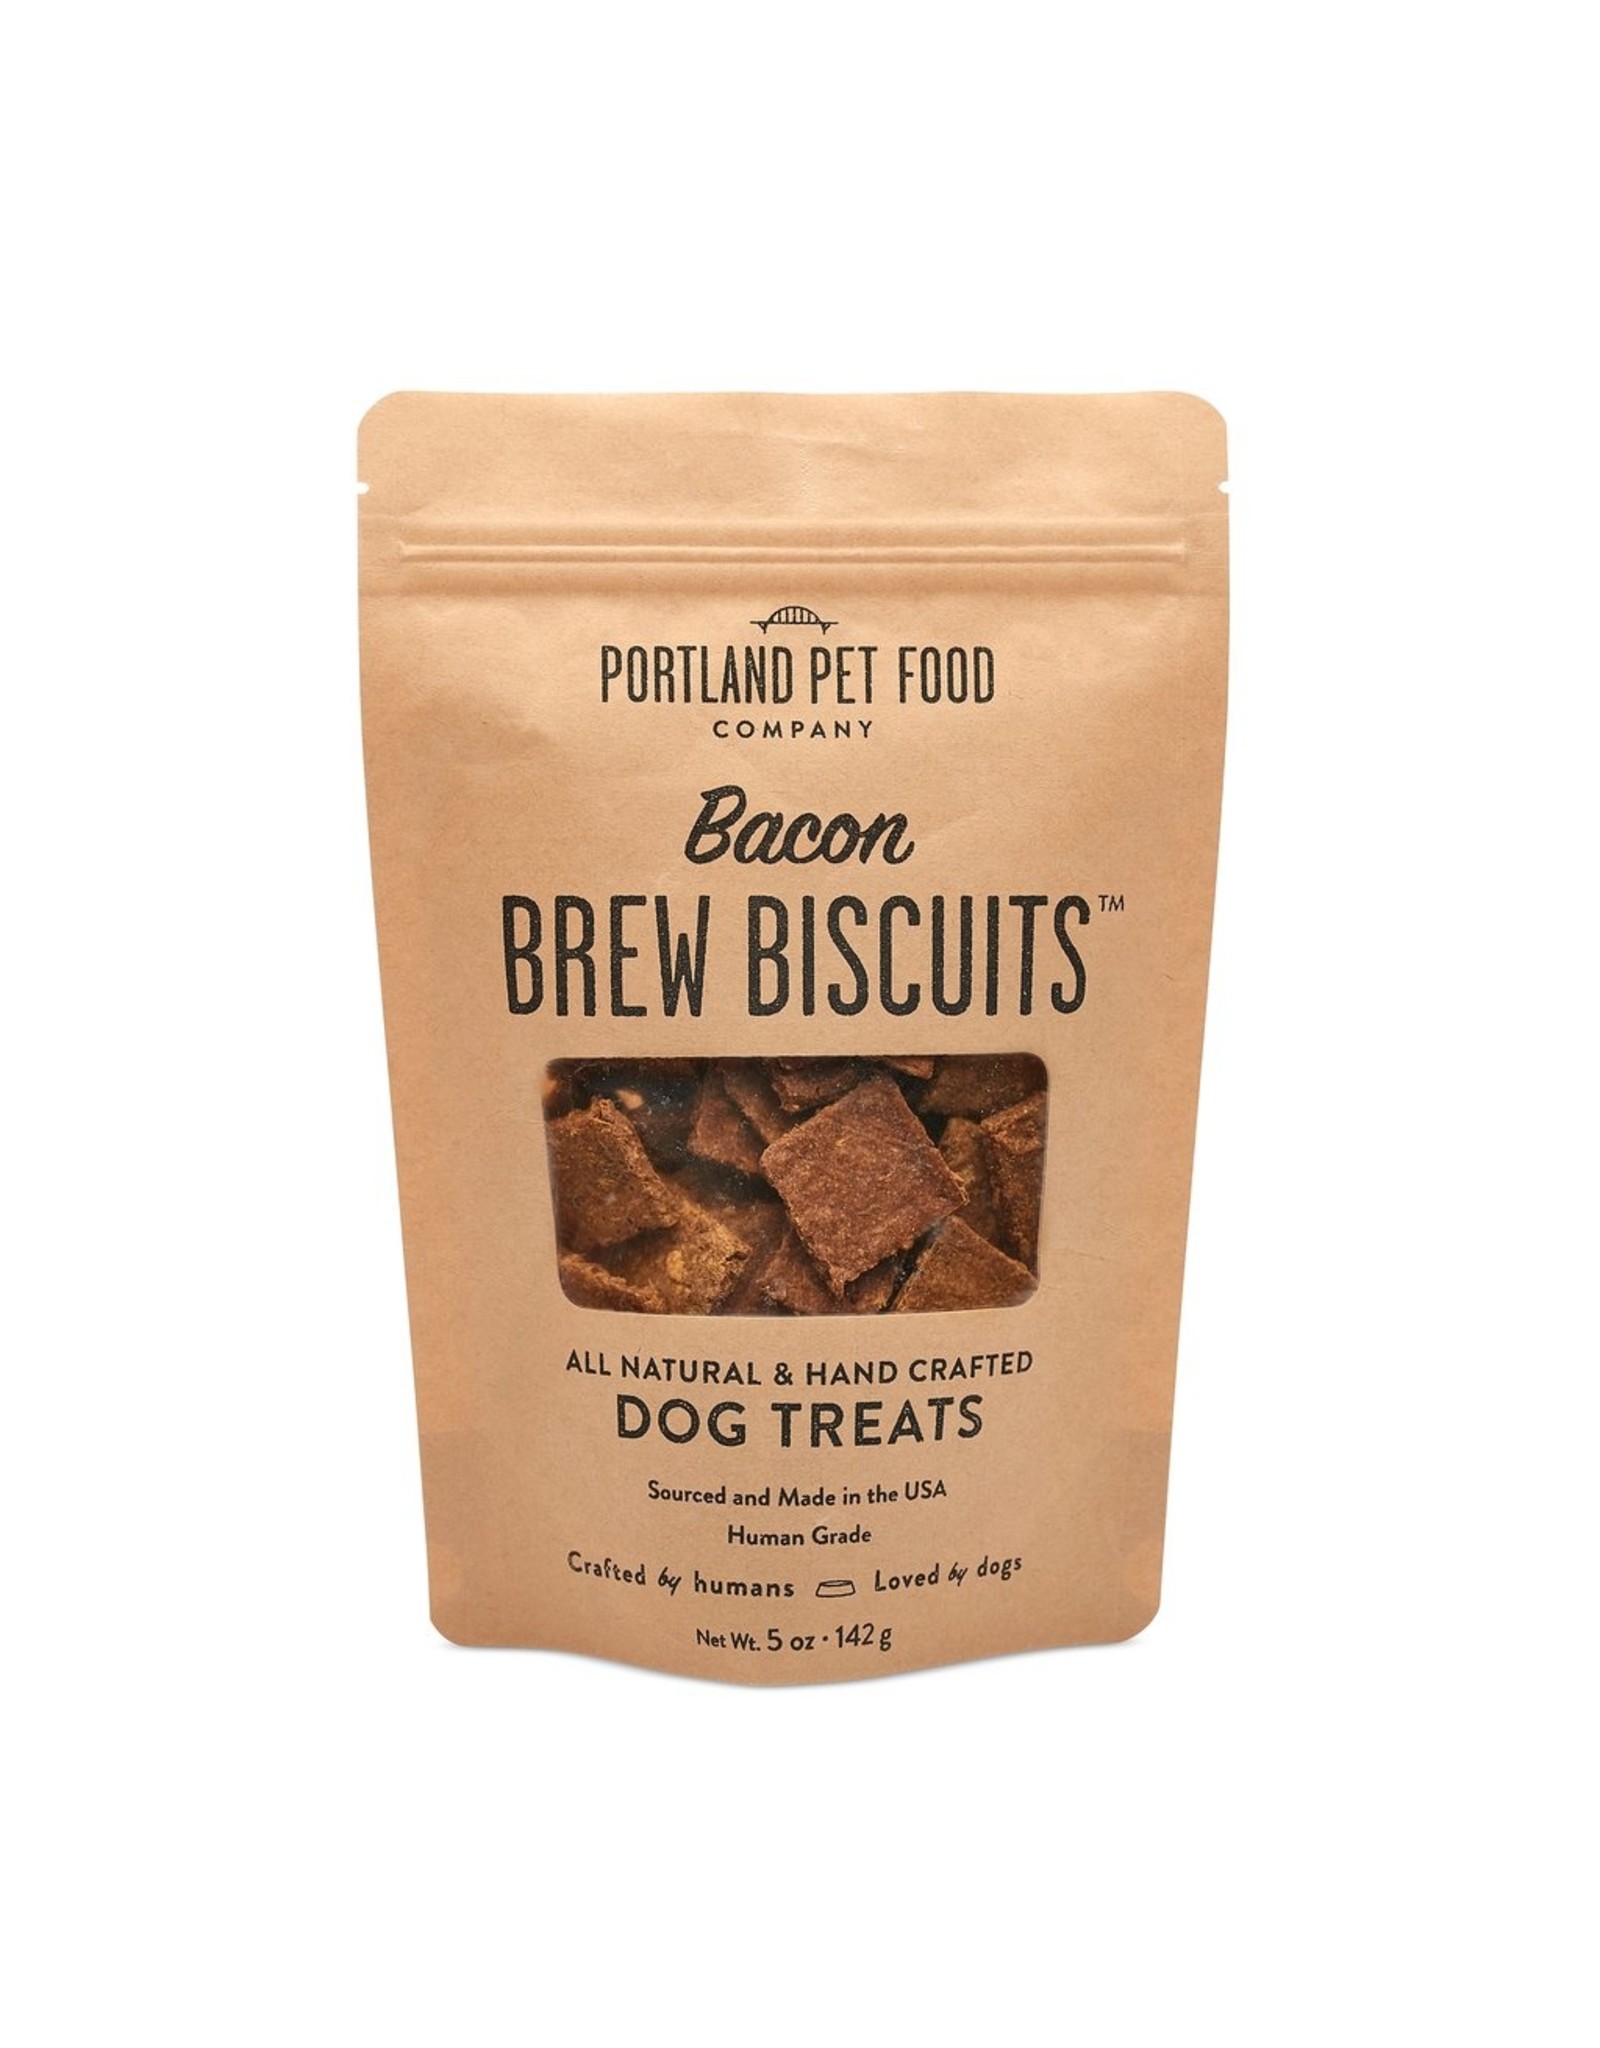 Portland Pet Food Company Portland Pet Food Company Bacon Brew Biscuits 5oz